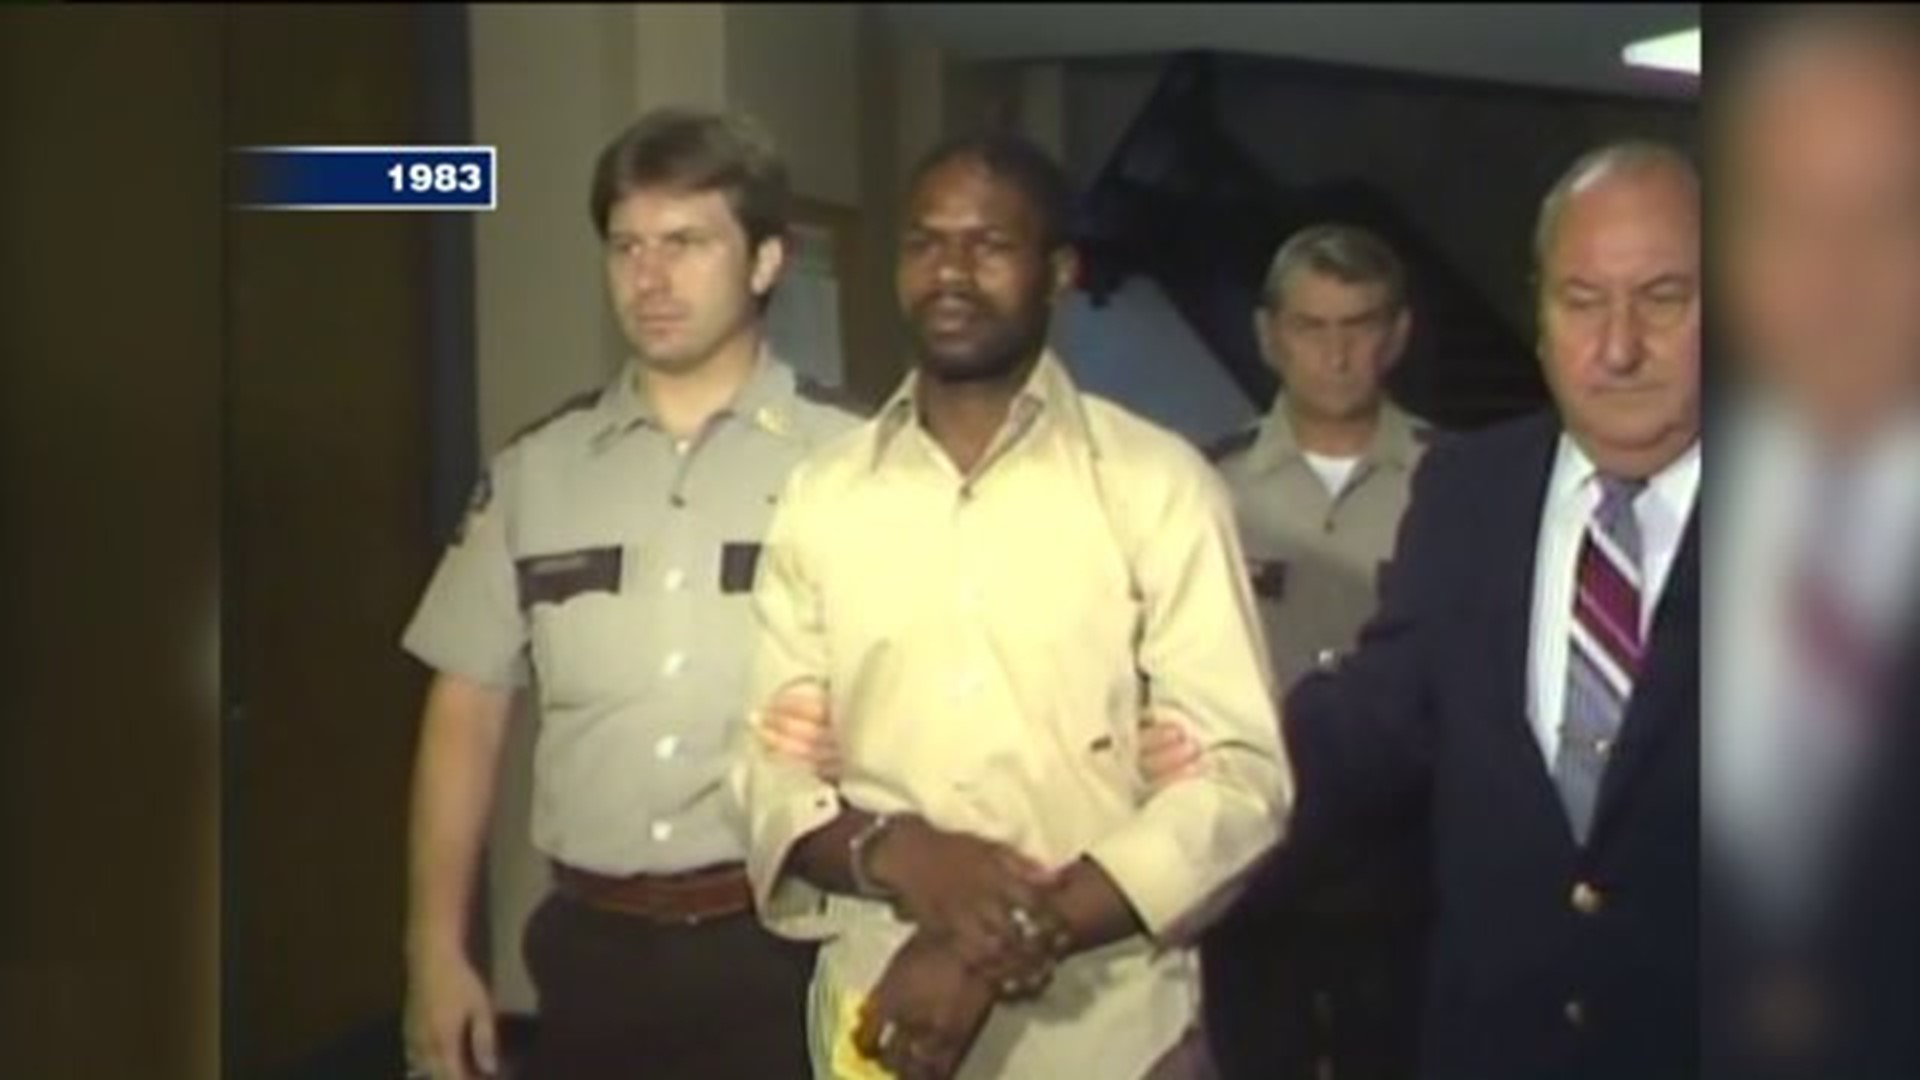 Video Vault: Tyrone Moore Murder Conviction in 1983